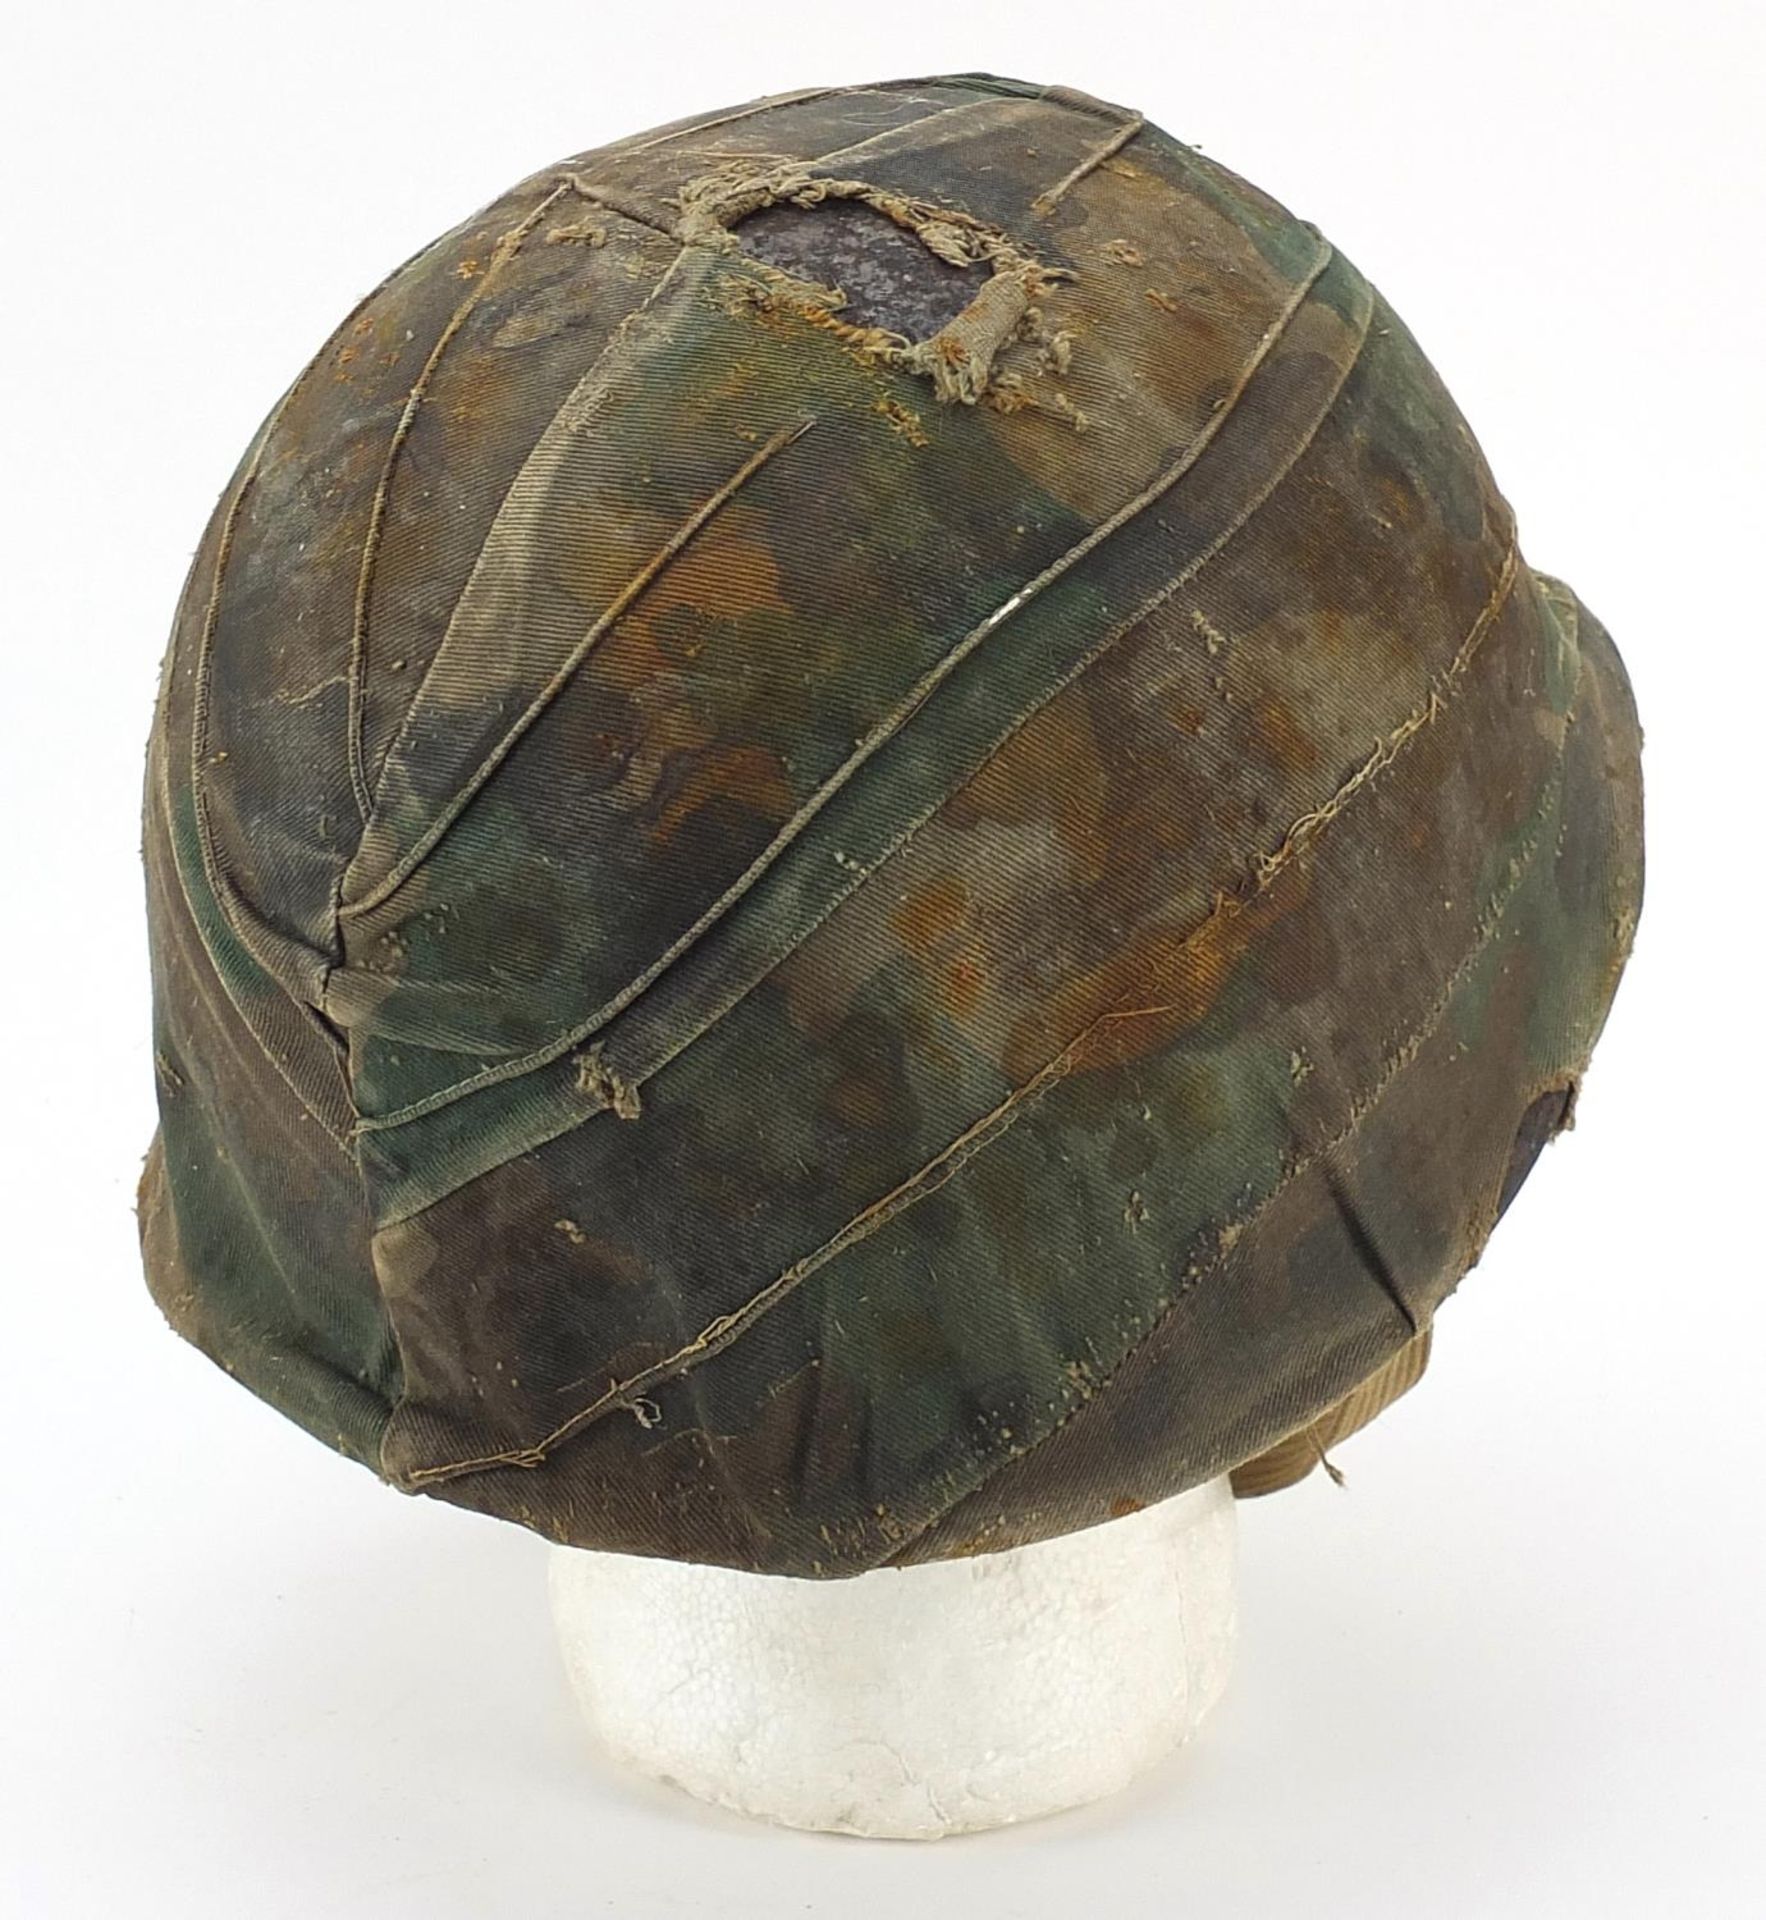 Military interest USM1 helmet with camouflage cover - Image 2 of 3